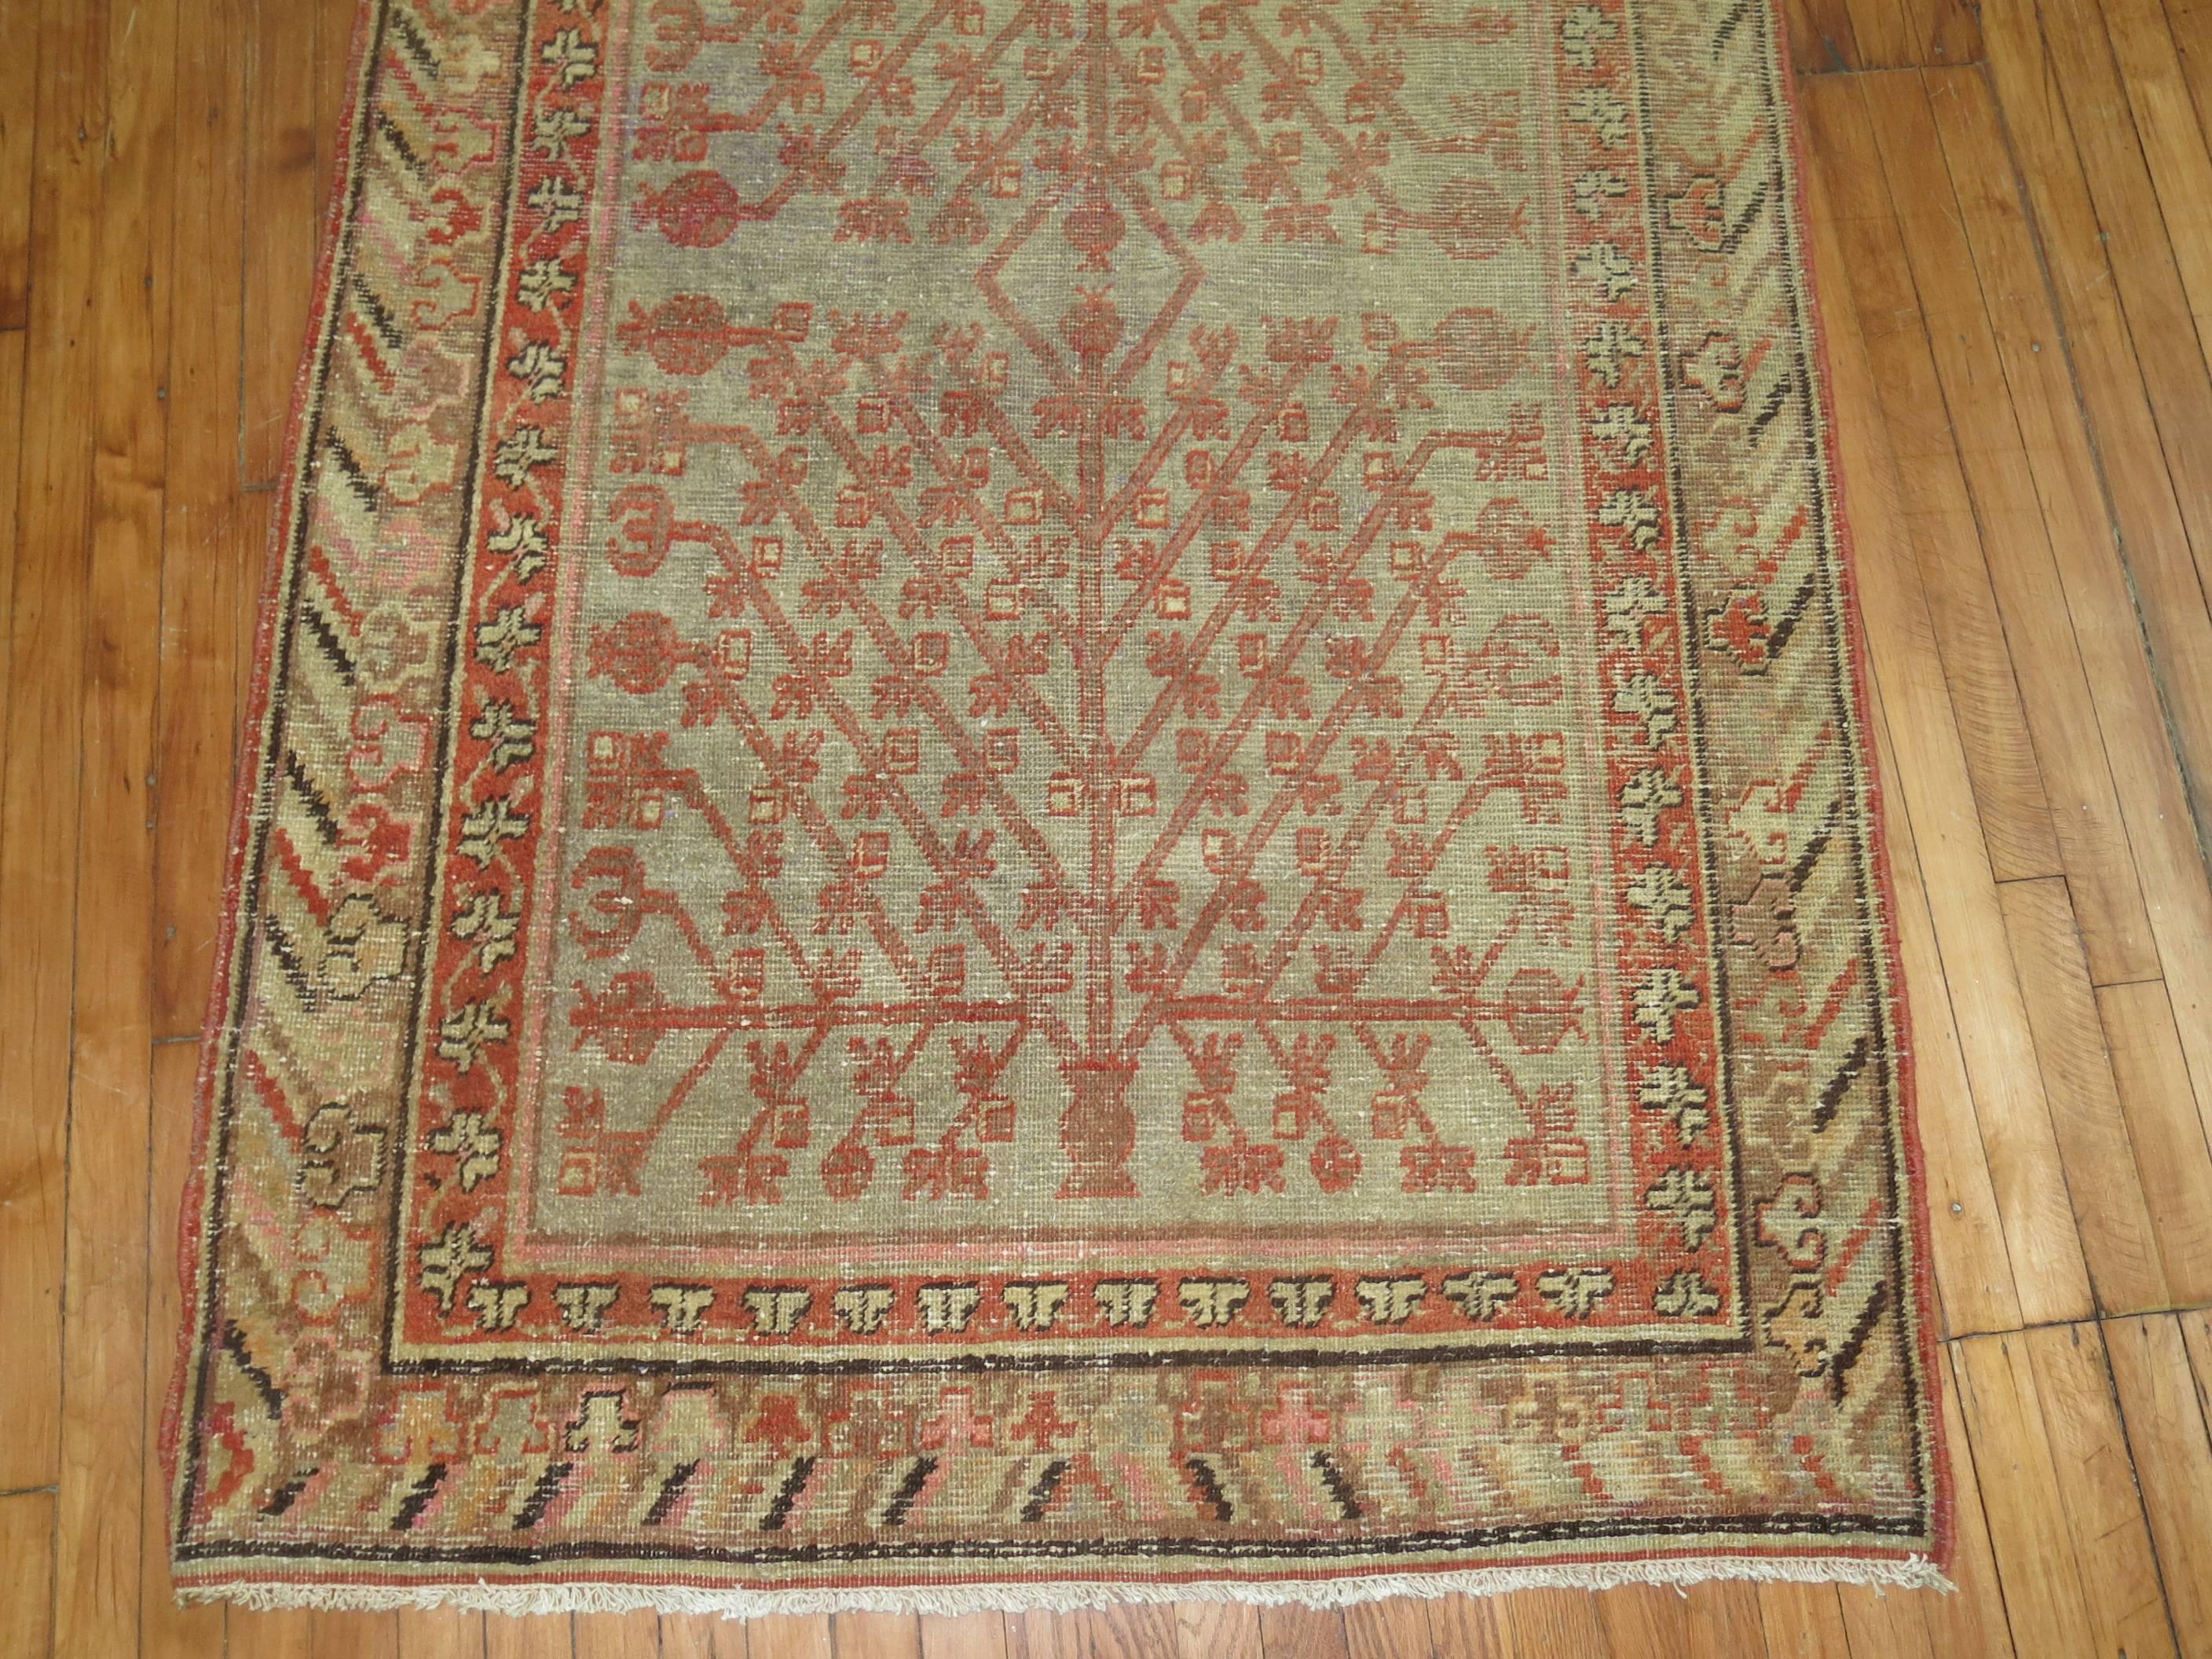 Worn Antique Khotan Area Size Rug In Fair Condition For Sale In New York, NY